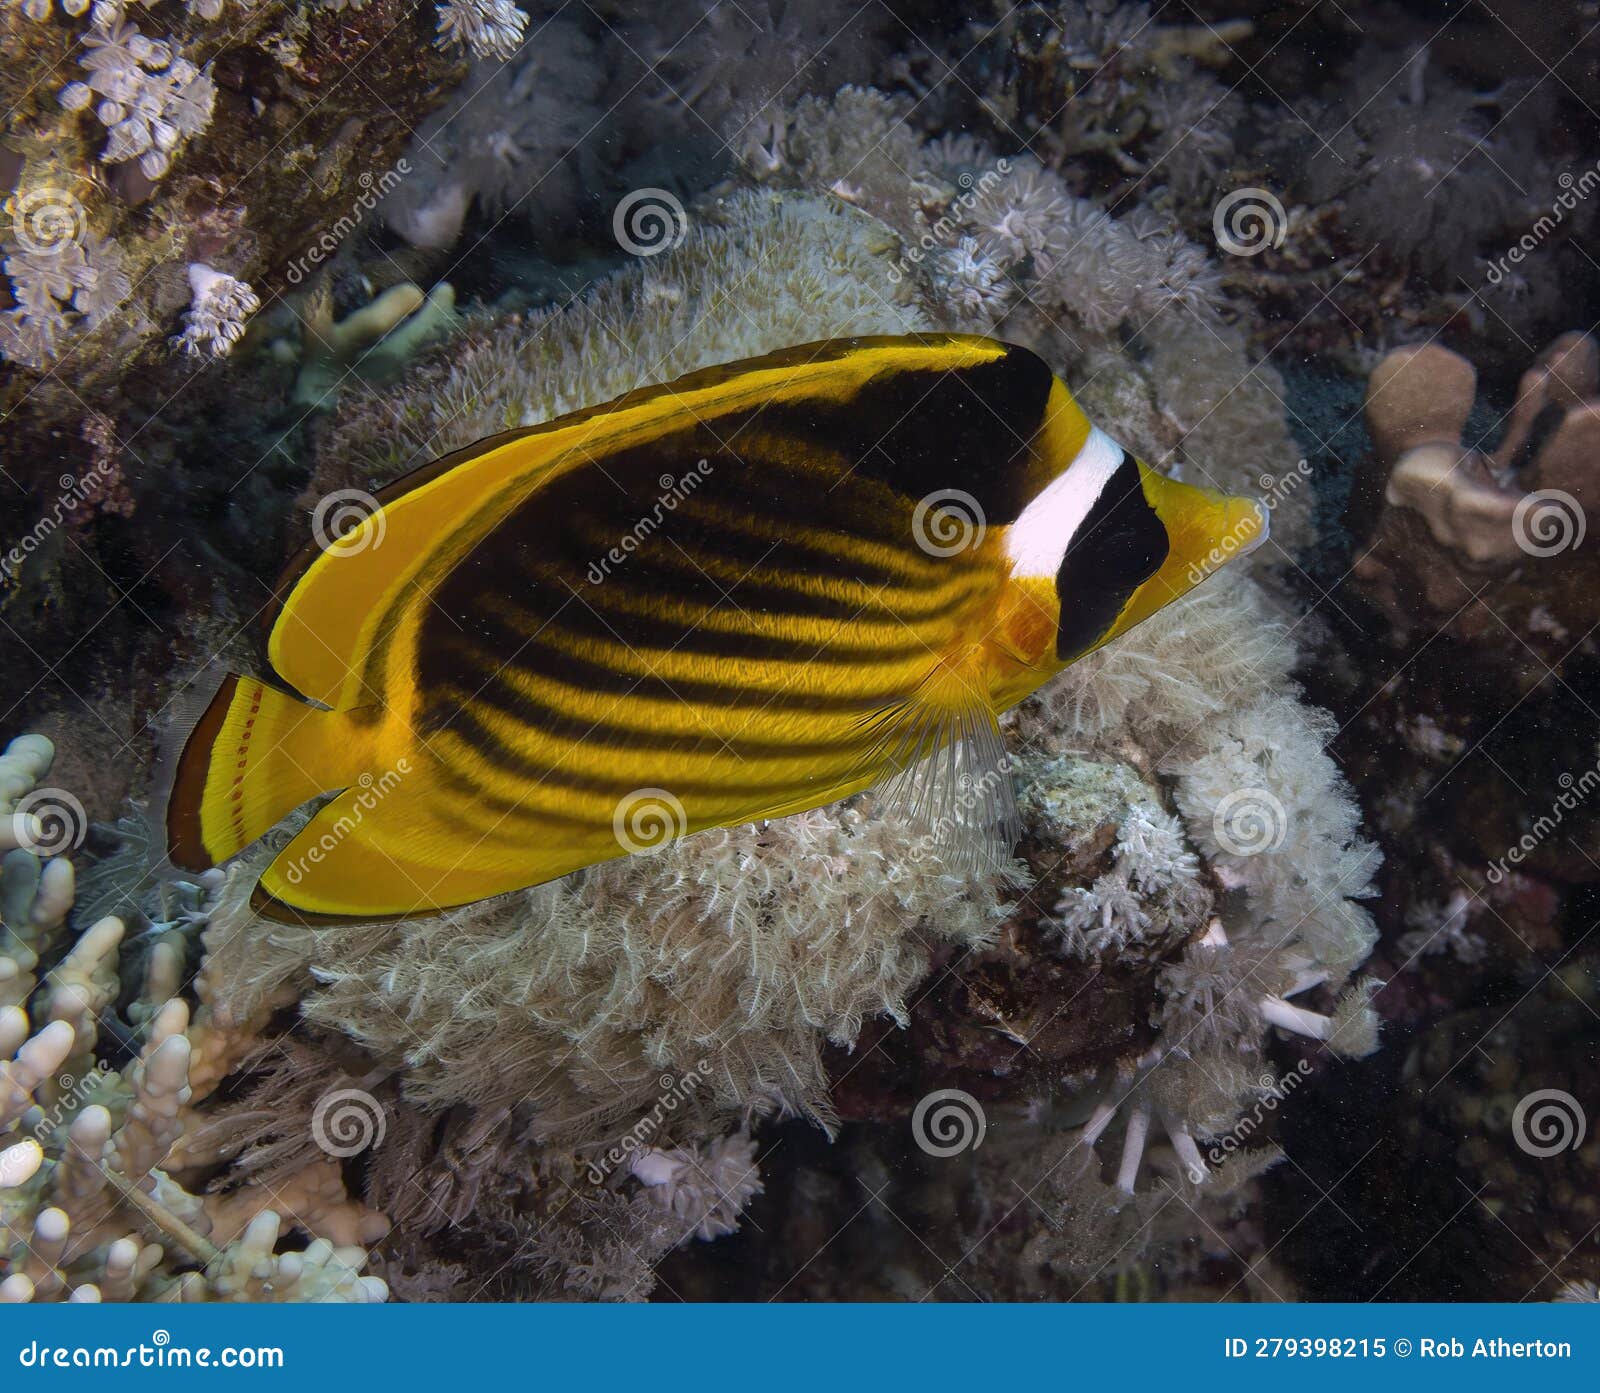 a racoon butterflyfish (chaetodon lunula) in the red sea